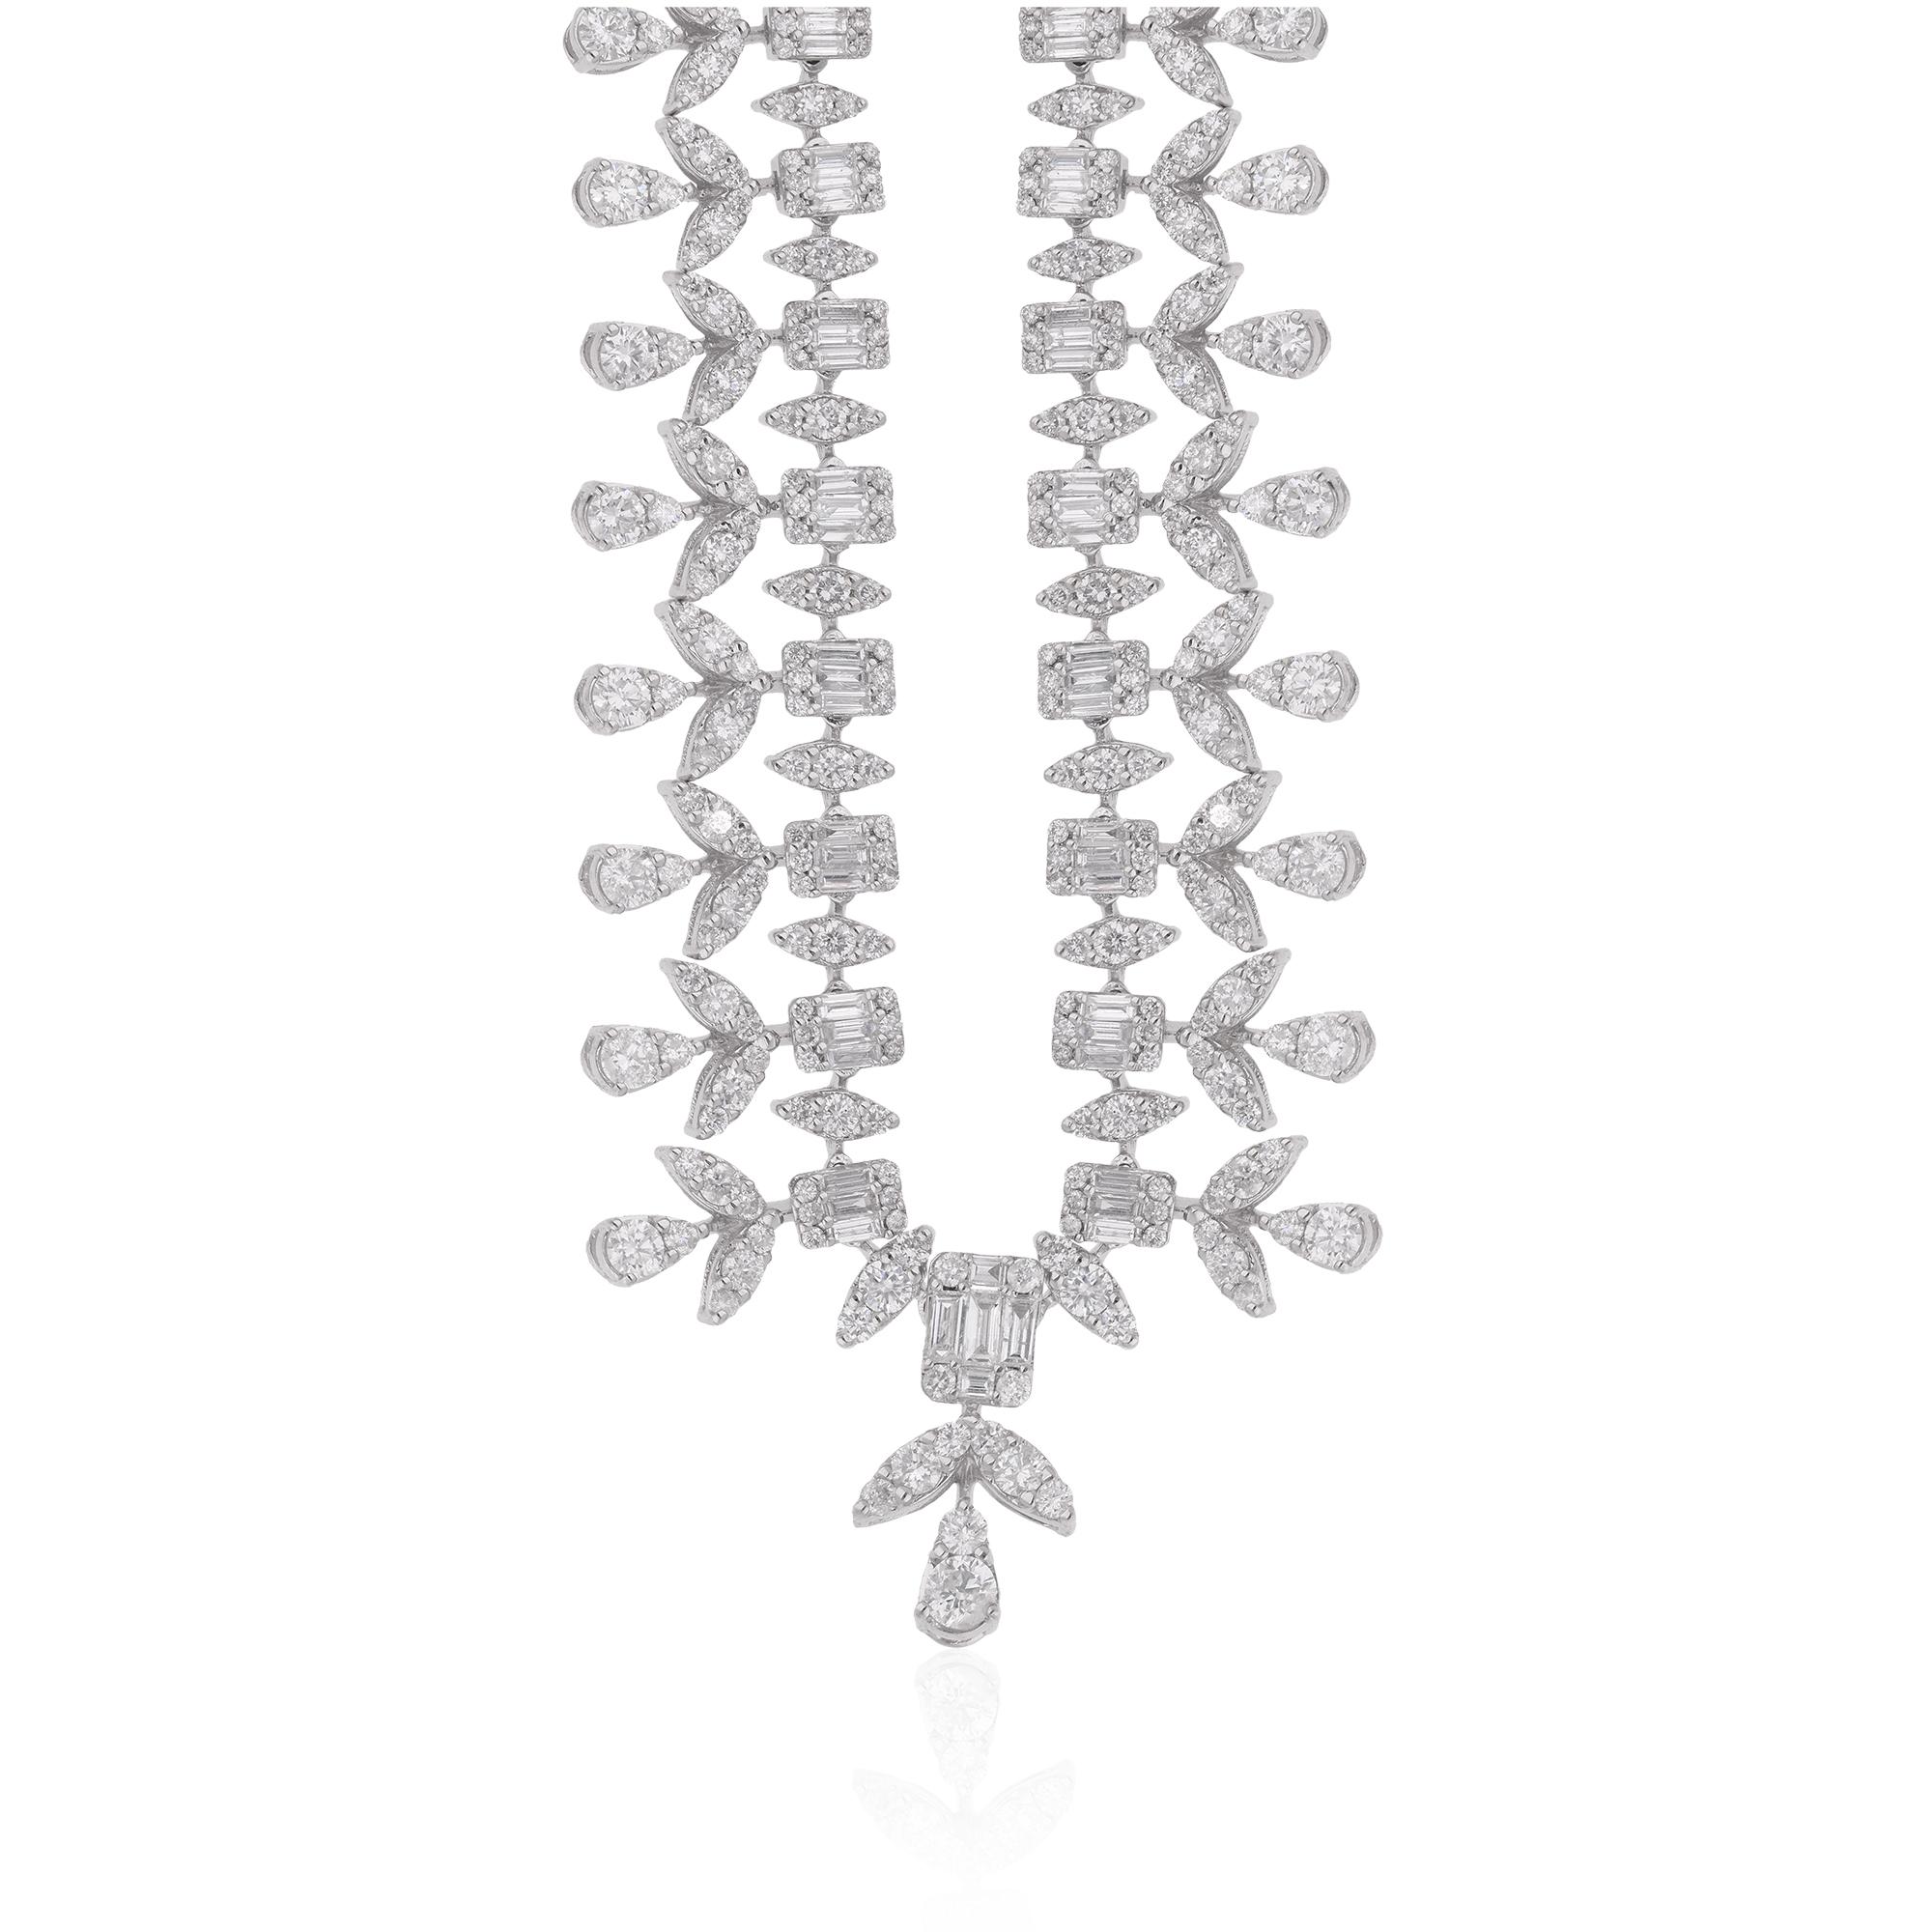 Indulge in the epitome of luxury and sophistication with this Natural 8.84 Carat Baguette & Round Diamond Necklace, meticulously crafted in 18 karat white gold. This exquisite necklace features a dazzling array of baguette and round diamonds,